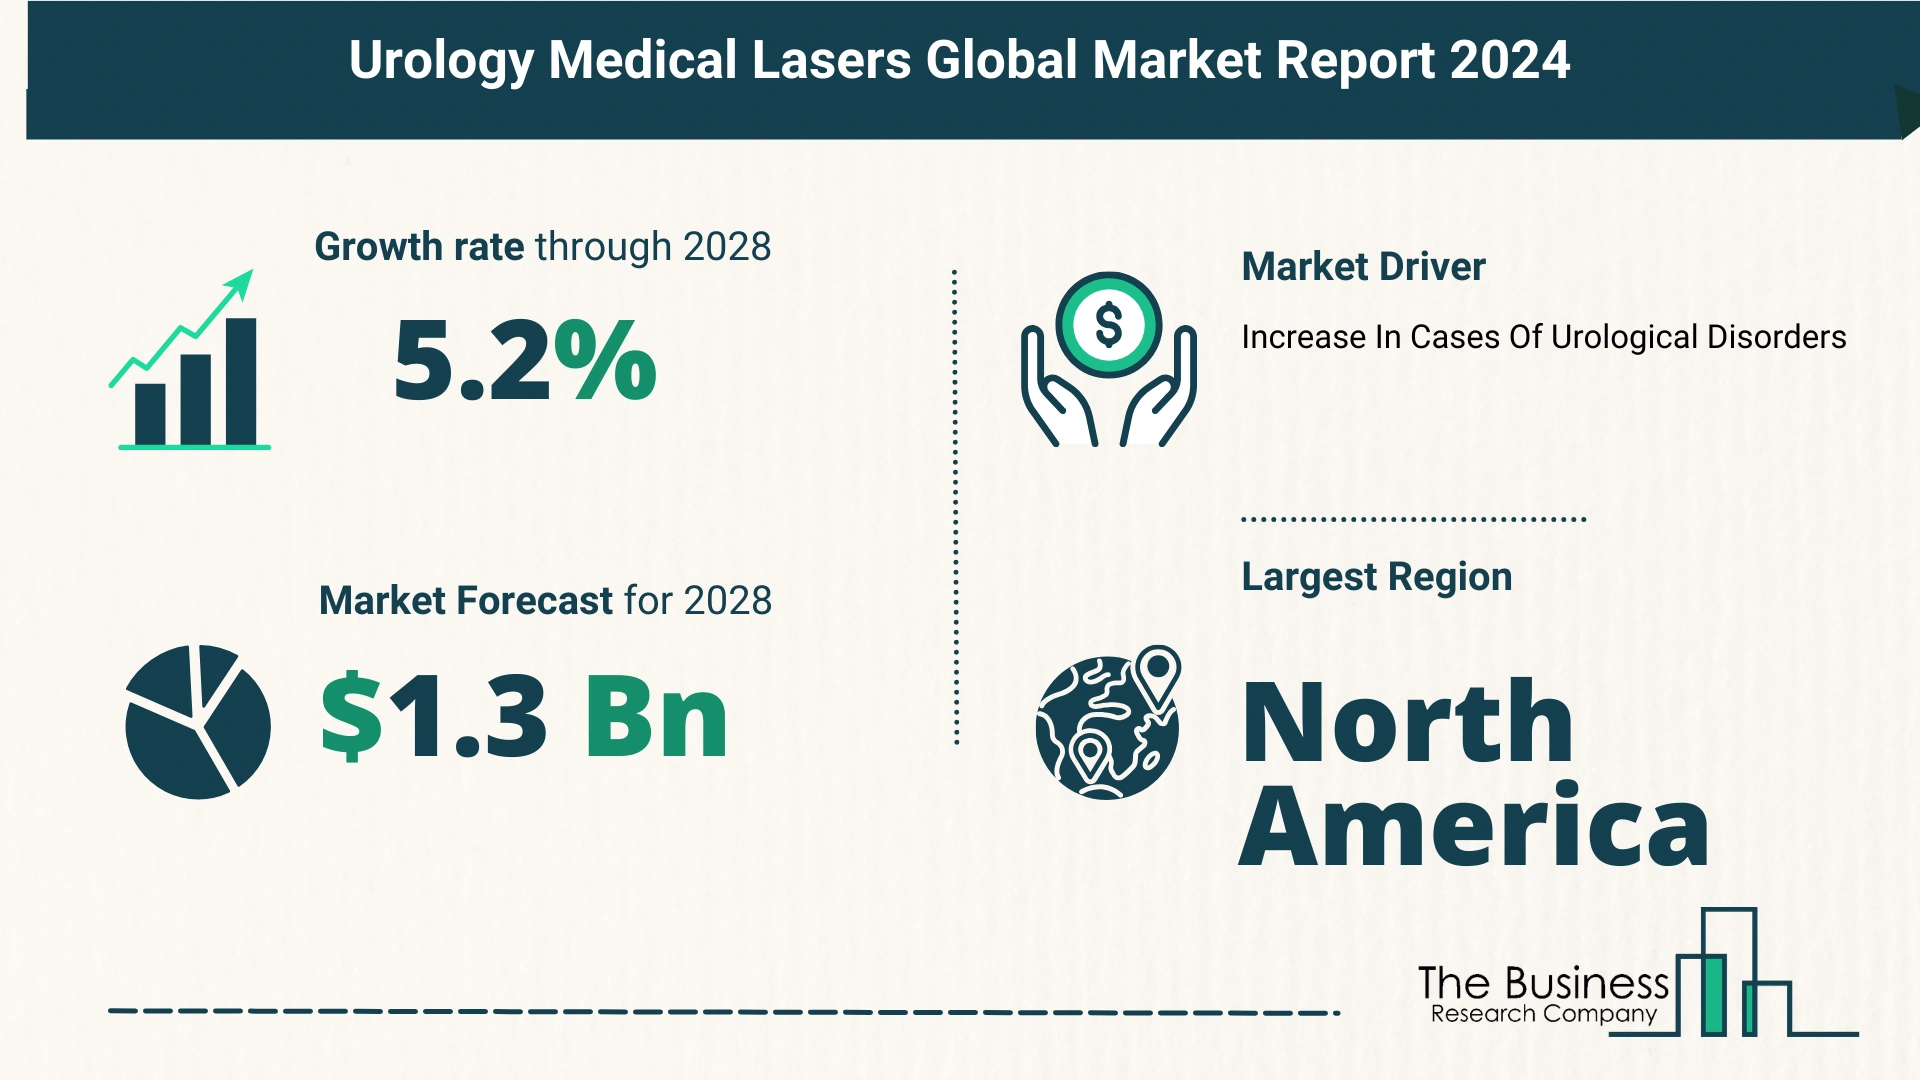 What Is The Forecast Growth Rate For The Urology Medical Lasers Market?